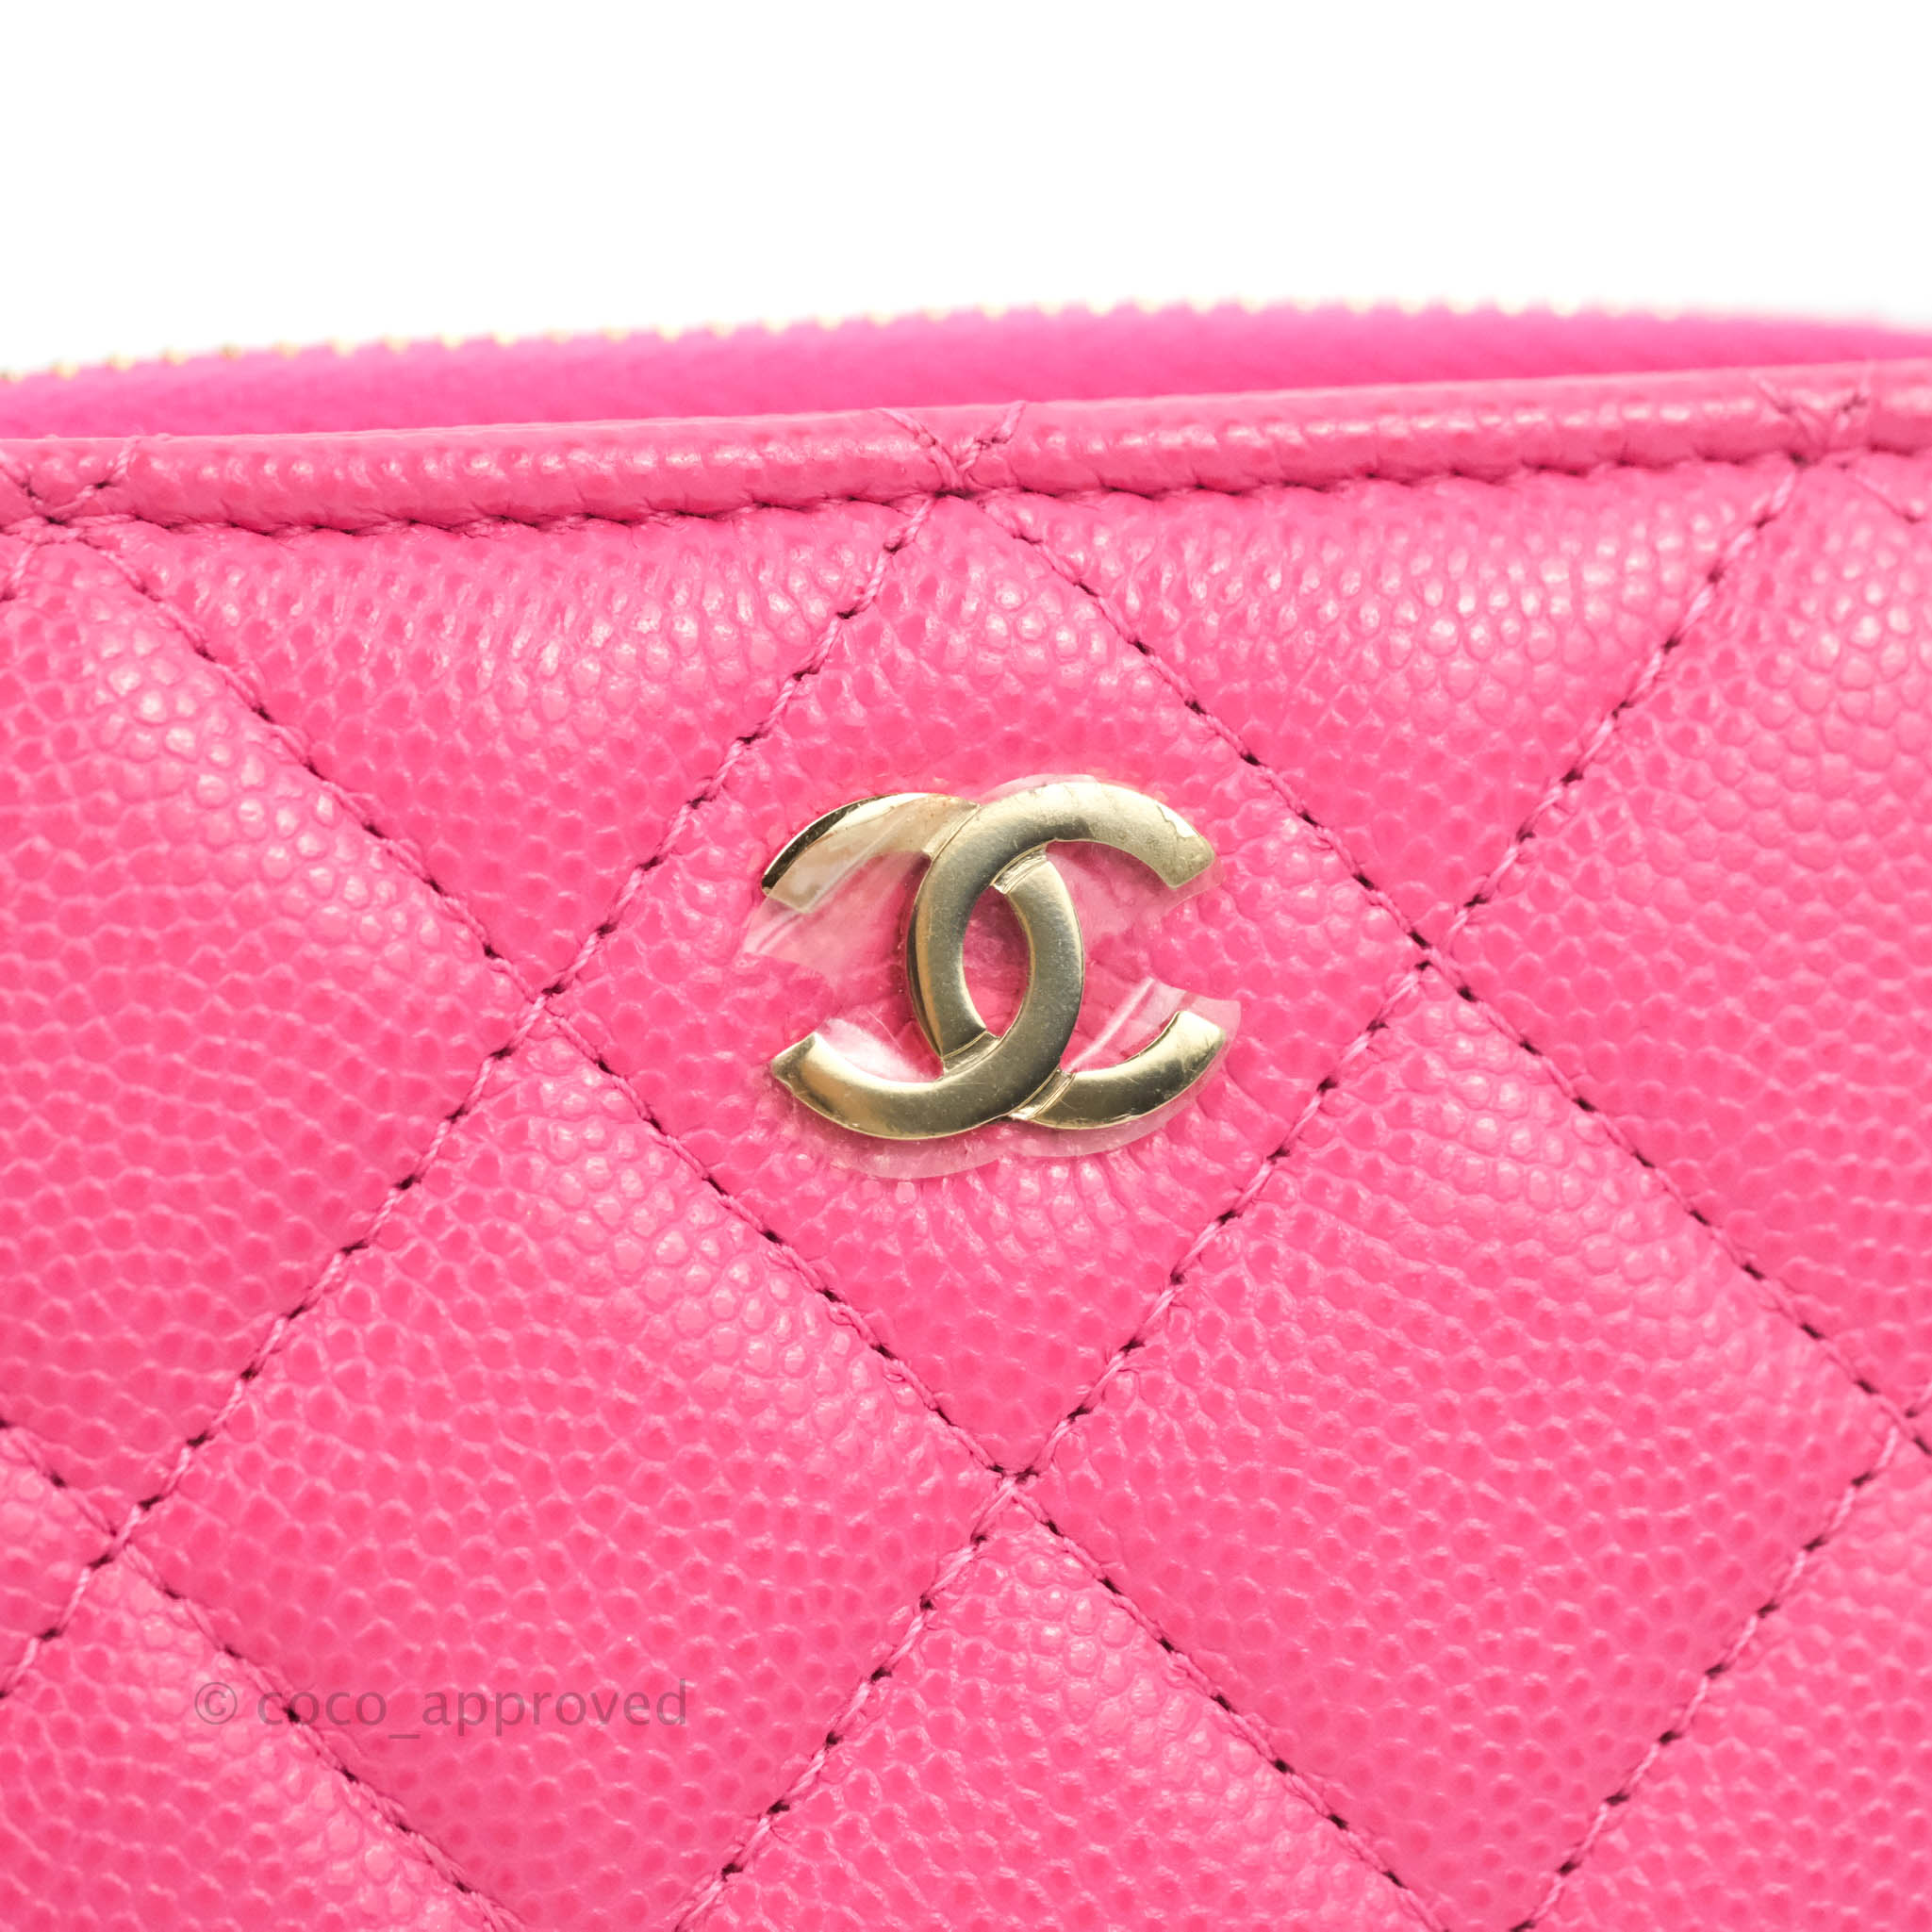 Chanel Caviar Quilted Zip Coin Purse Pink - LVLENKA Luxury Consignment